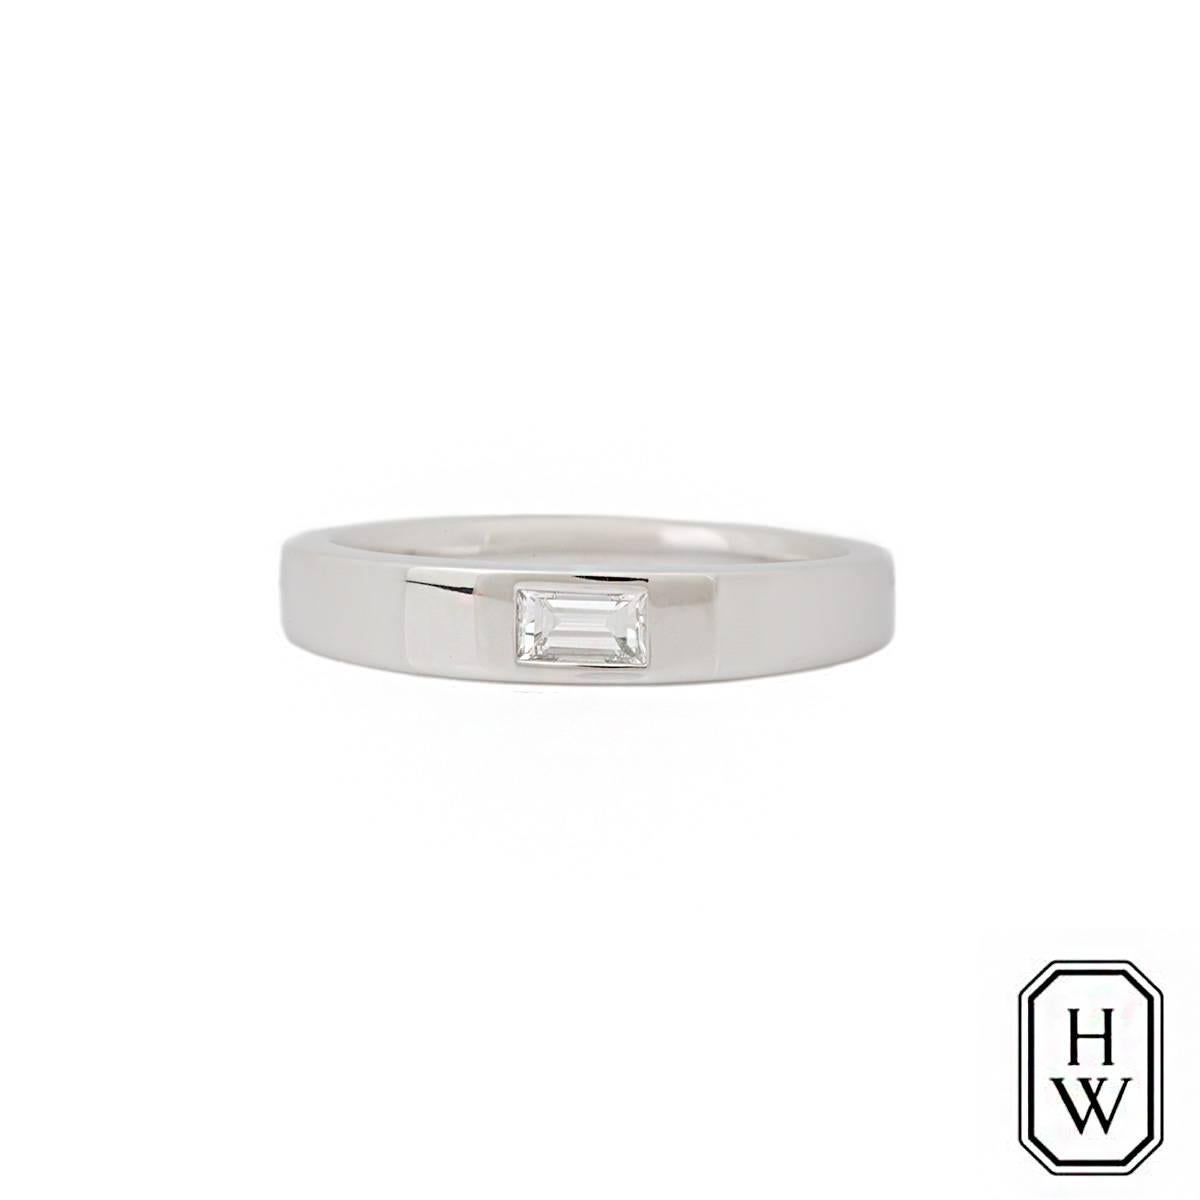 A diamond set band in platinum by Harry Winston. The band is set to the centre with a single baguette cut diamond weighing 0.21ct, F colour and VVS2 clarity. The tapered band measures 4mm at the widest point and is currently a size O½ but can be